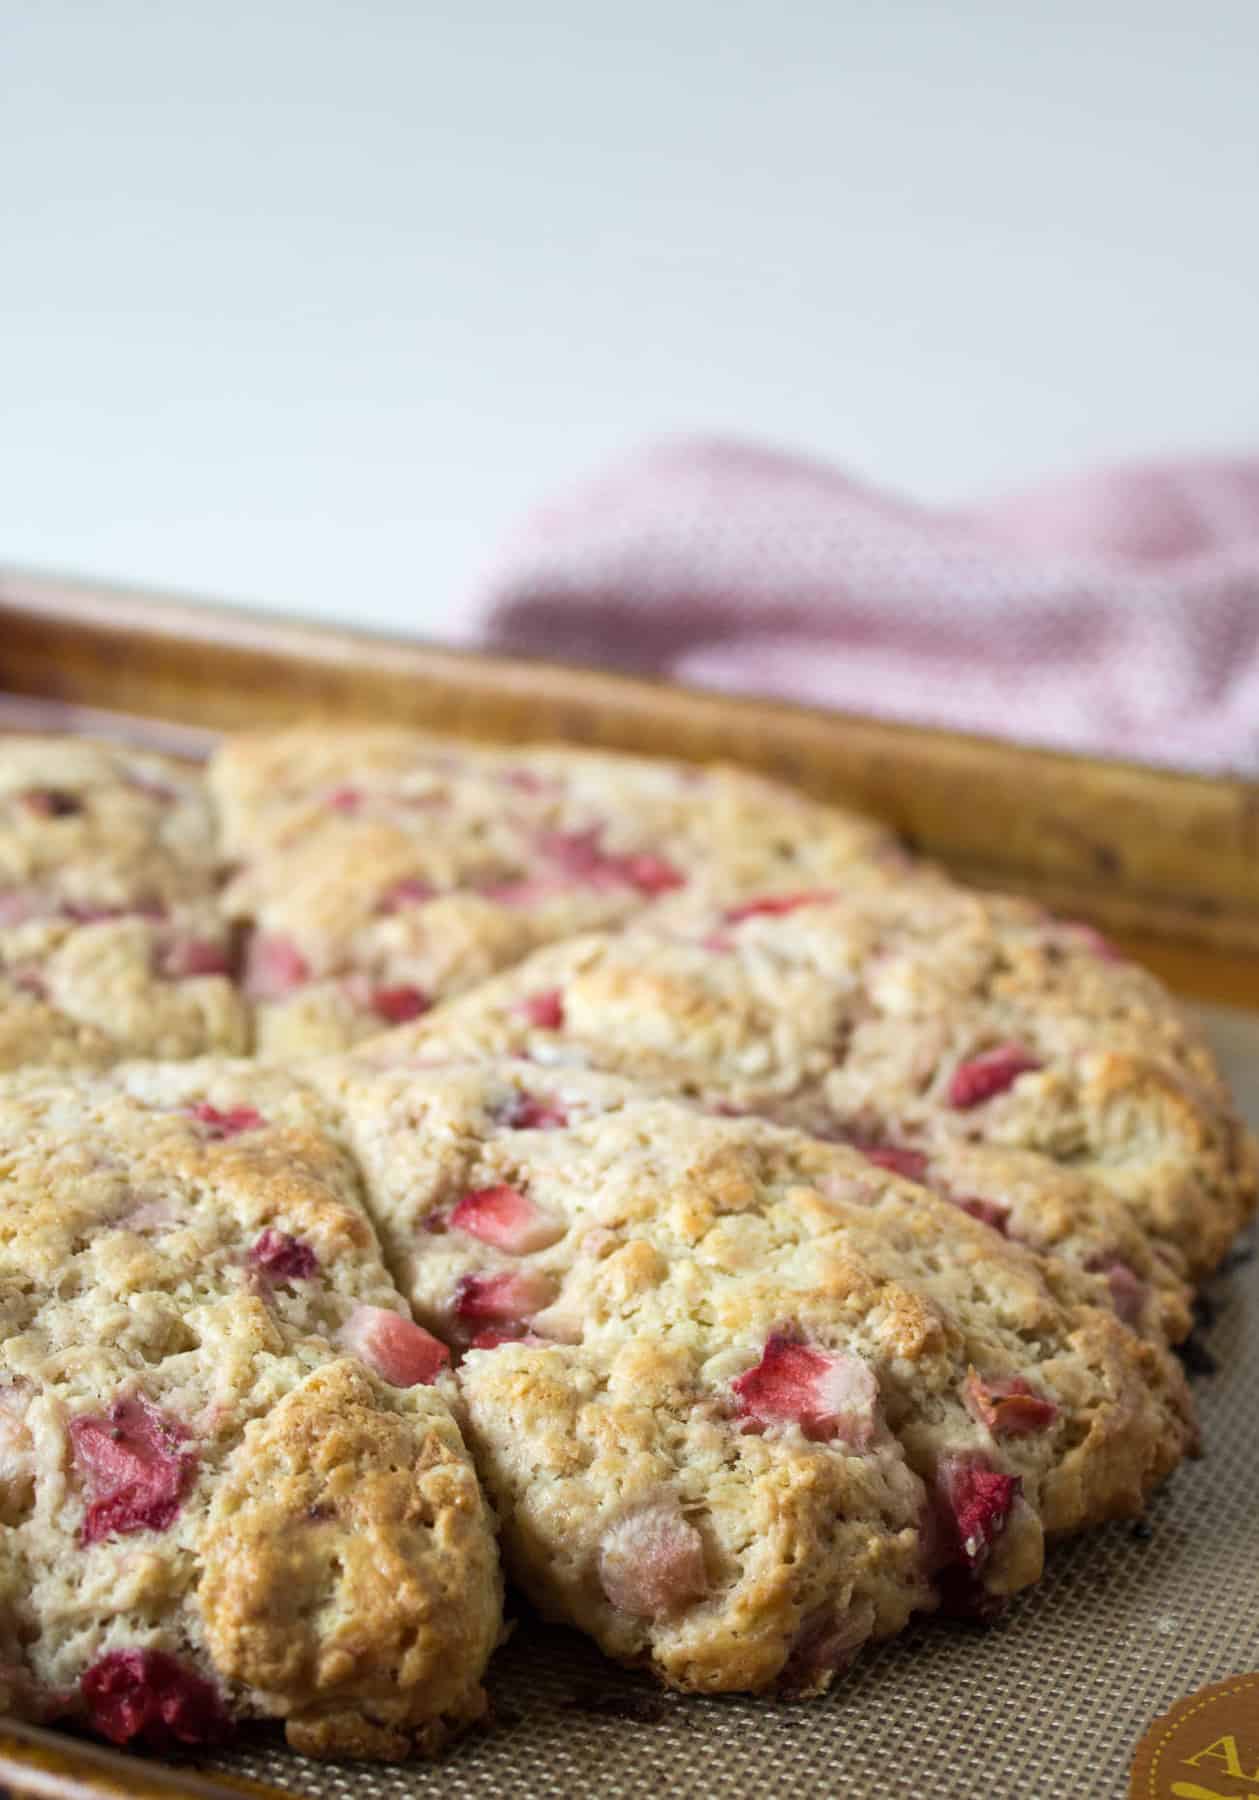 A baking sheet with baked strawberry scones.